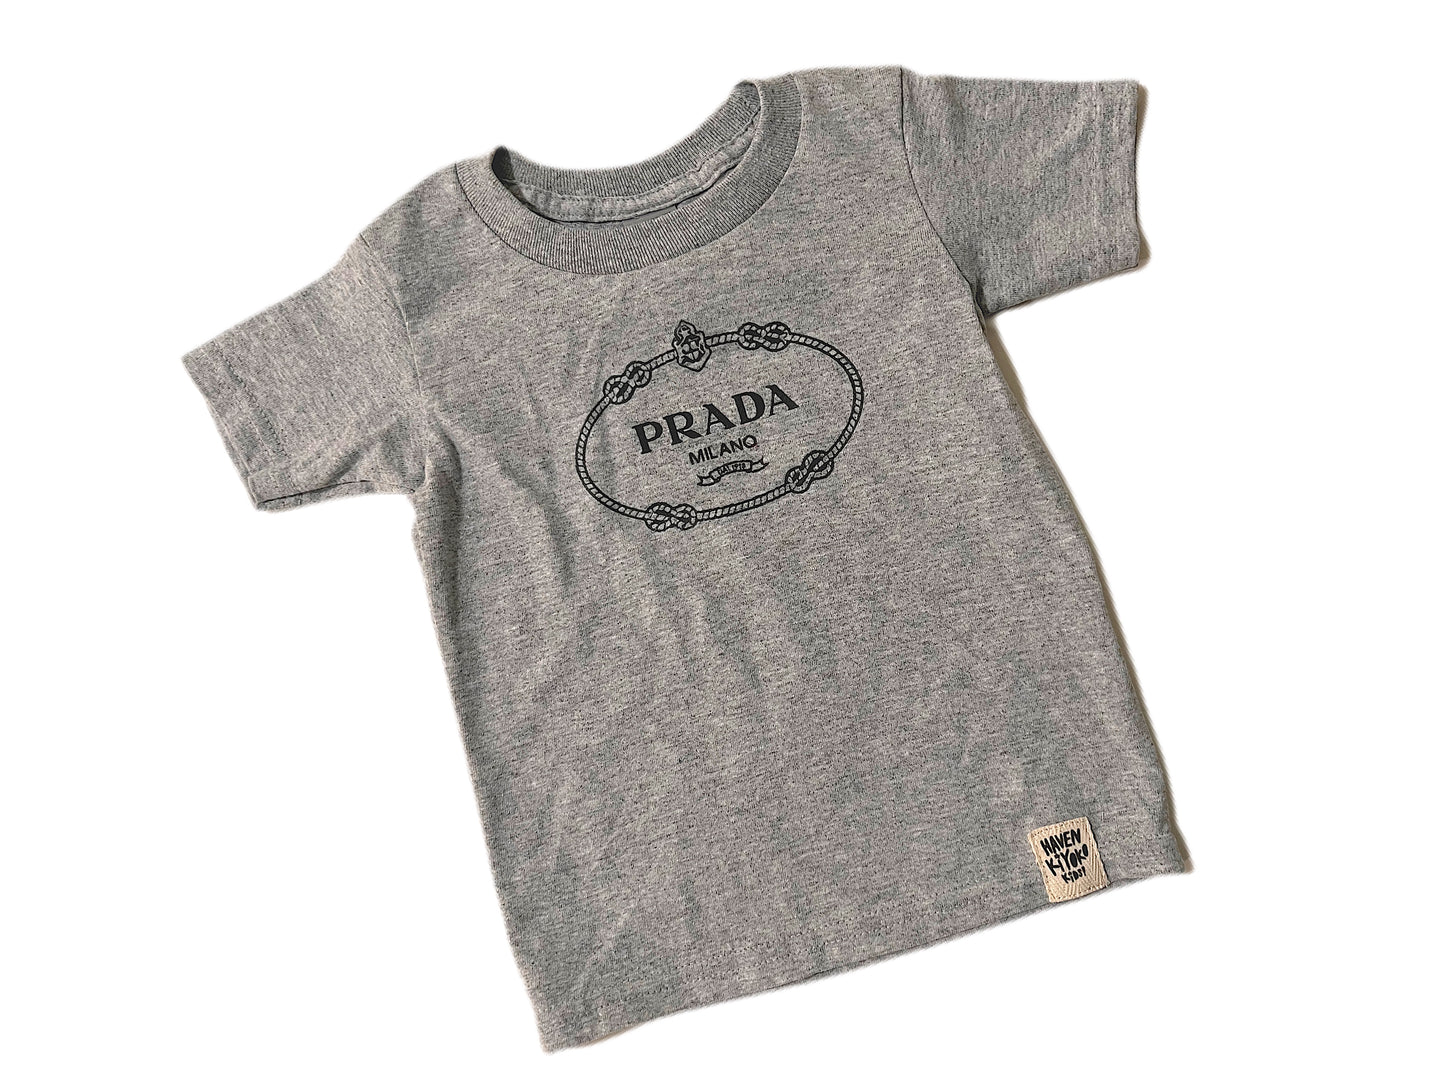 UPCYCLED MOD TEE - SIZE 3T